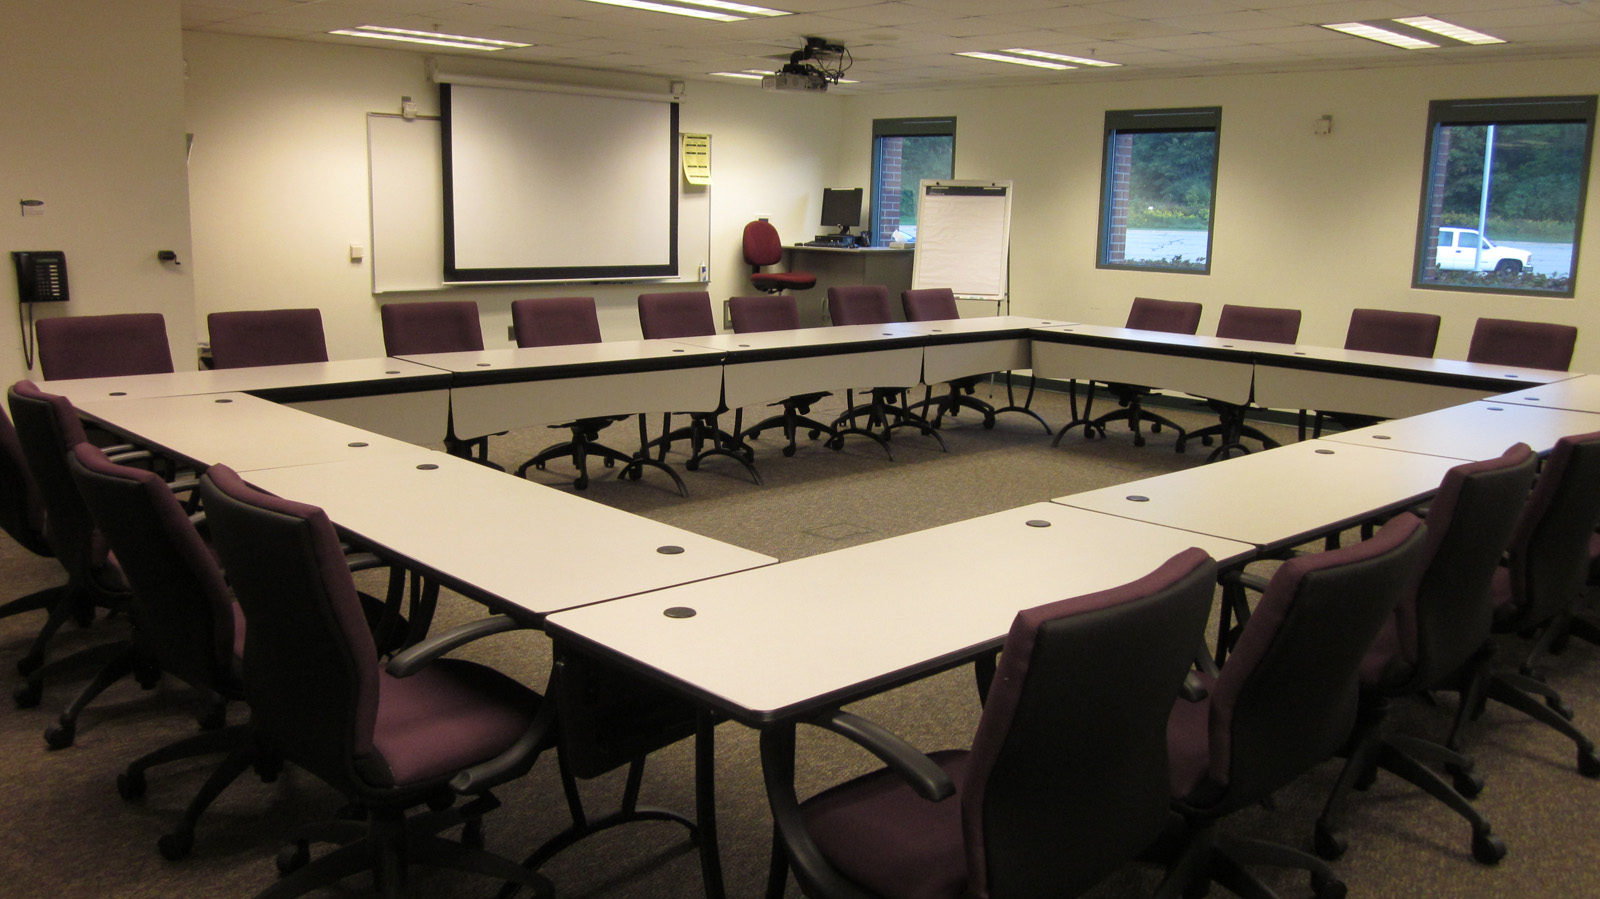 C1420-2 Meeting Room at the Groves